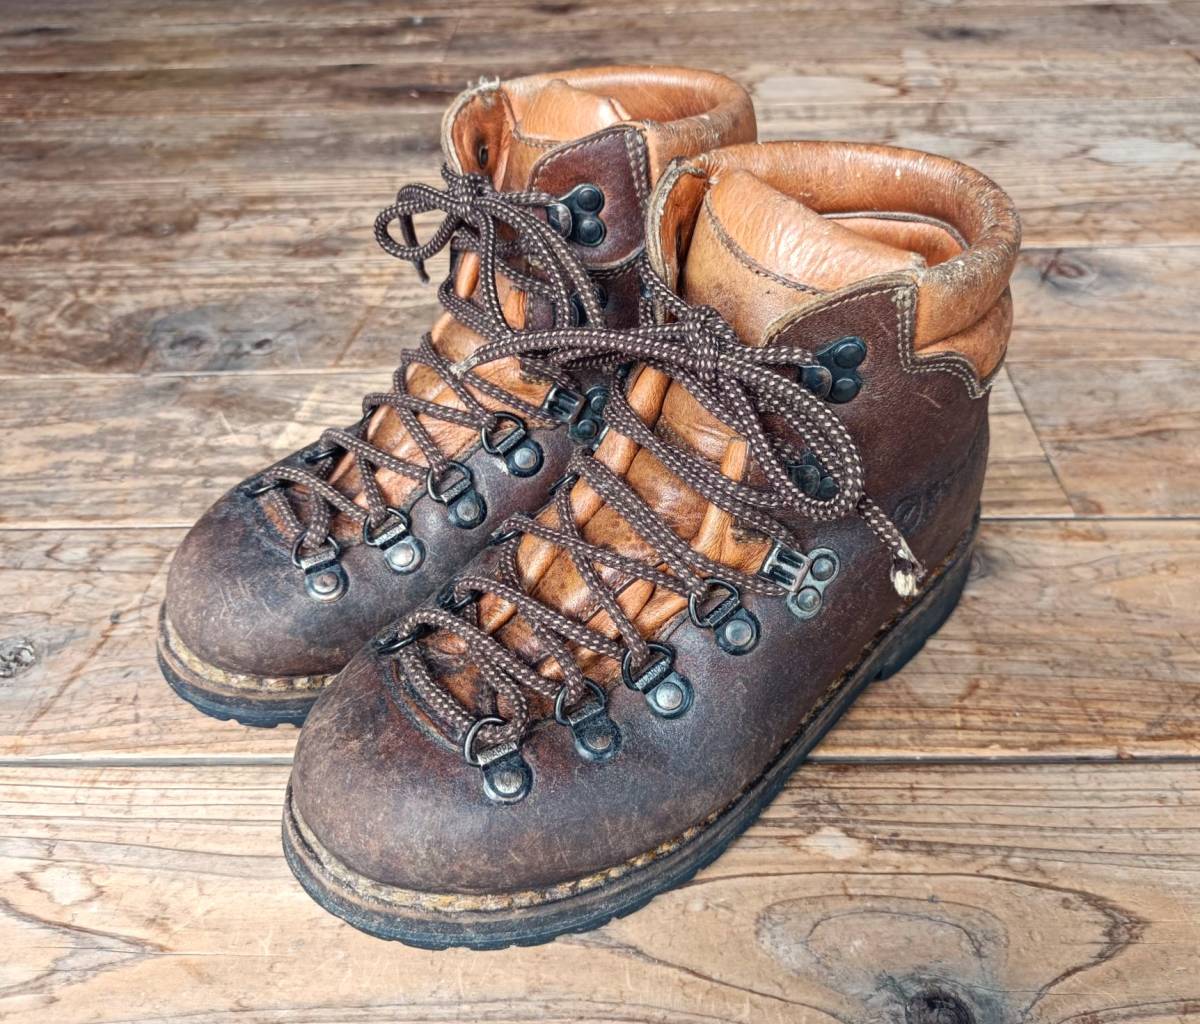  free shipping! Italy made Scarpa SCARPA leather mountain climbing shoes leather shoes mountain boots size 37(23.5~24.) vibram outdoor old clothes vintagego low GORO